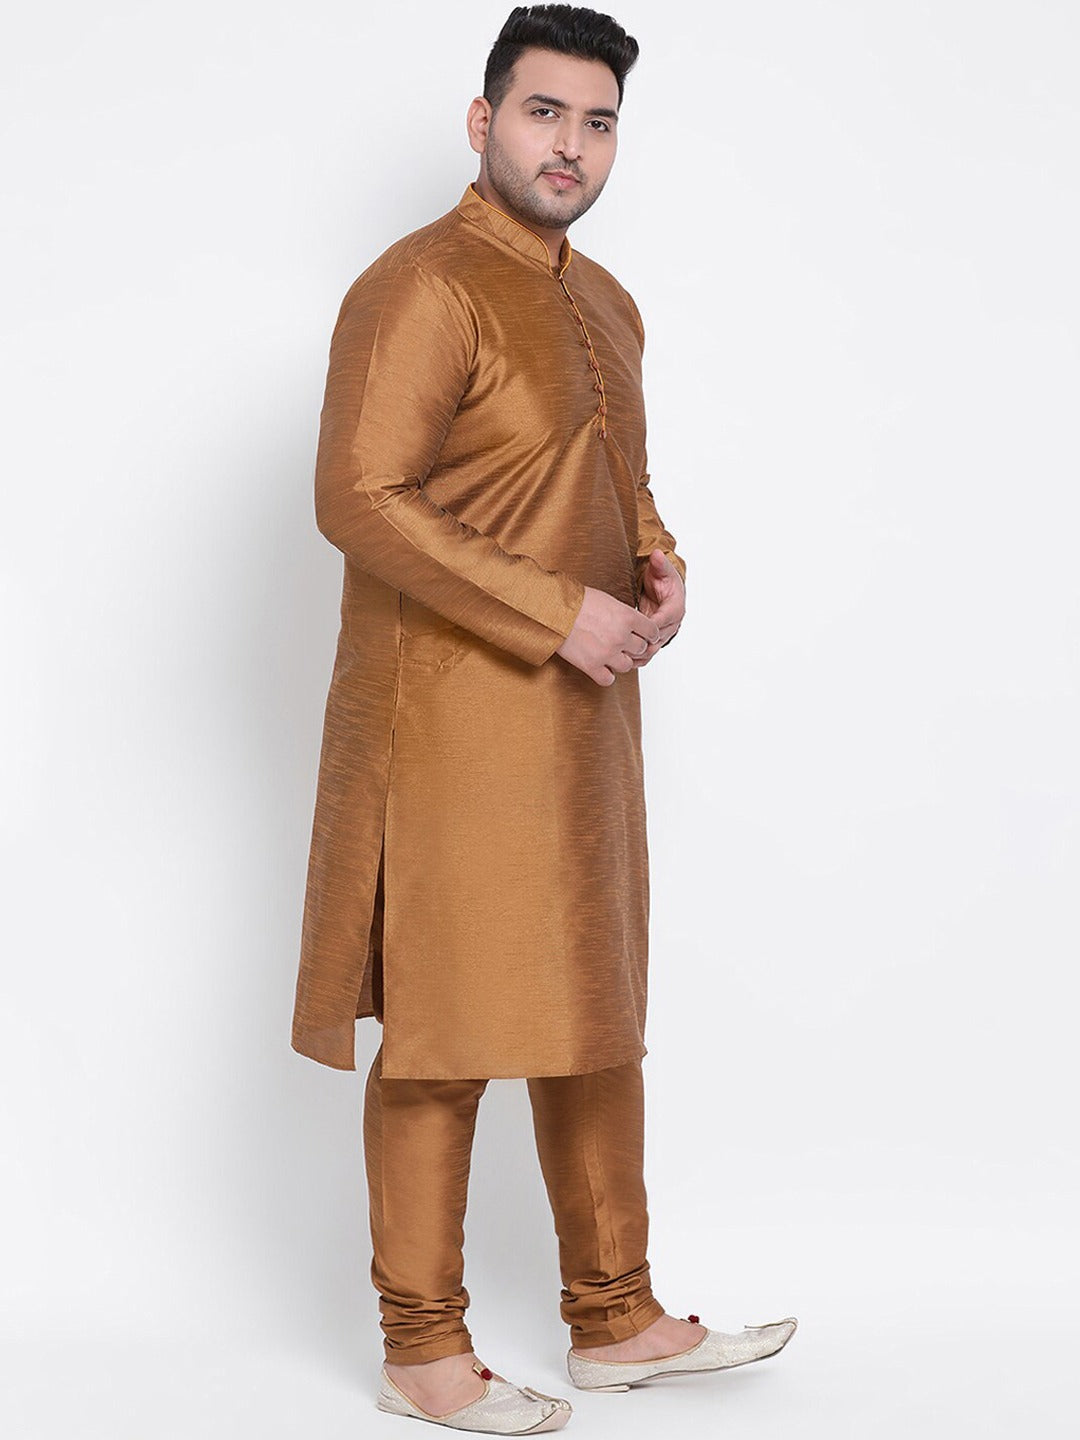 Glossy Brown Kurta Set Indian Clothing in Denver, CO, Aurora, CO, Boulder, CO, Fort Collins, CO, Colorado Springs, CO, Parker, CO, Highlands Ranch, CO, Cherry Creek, CO, Centennial, CO, and Longmont, CO. NATIONWIDE SHIPPING USA- India Fashion X